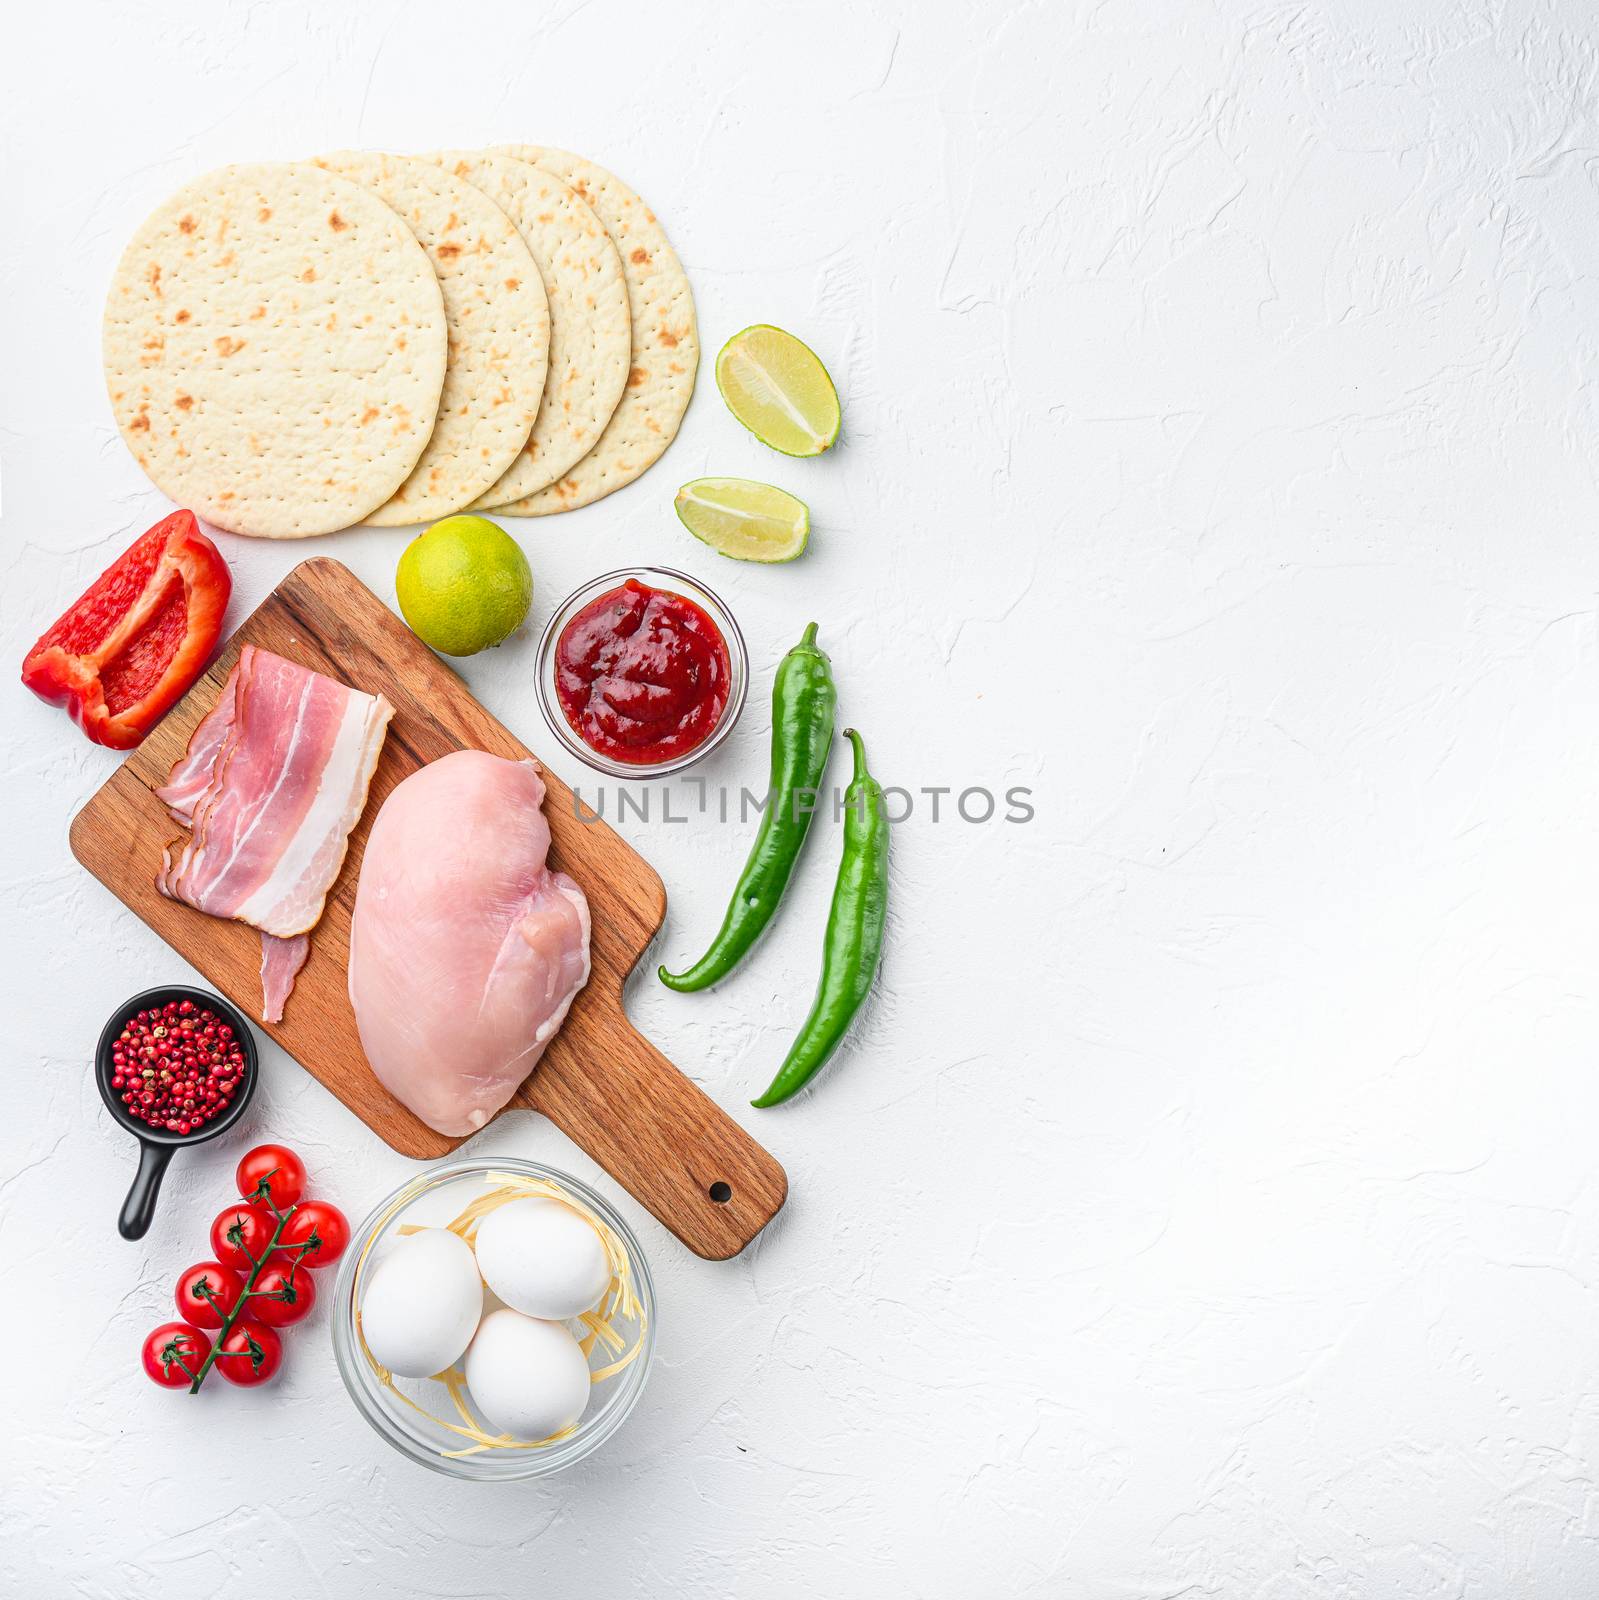 Mexican tacos with vegetables and meat Ingredient for cooking over white textured background, top view with space for text. by Ilianesolenyi